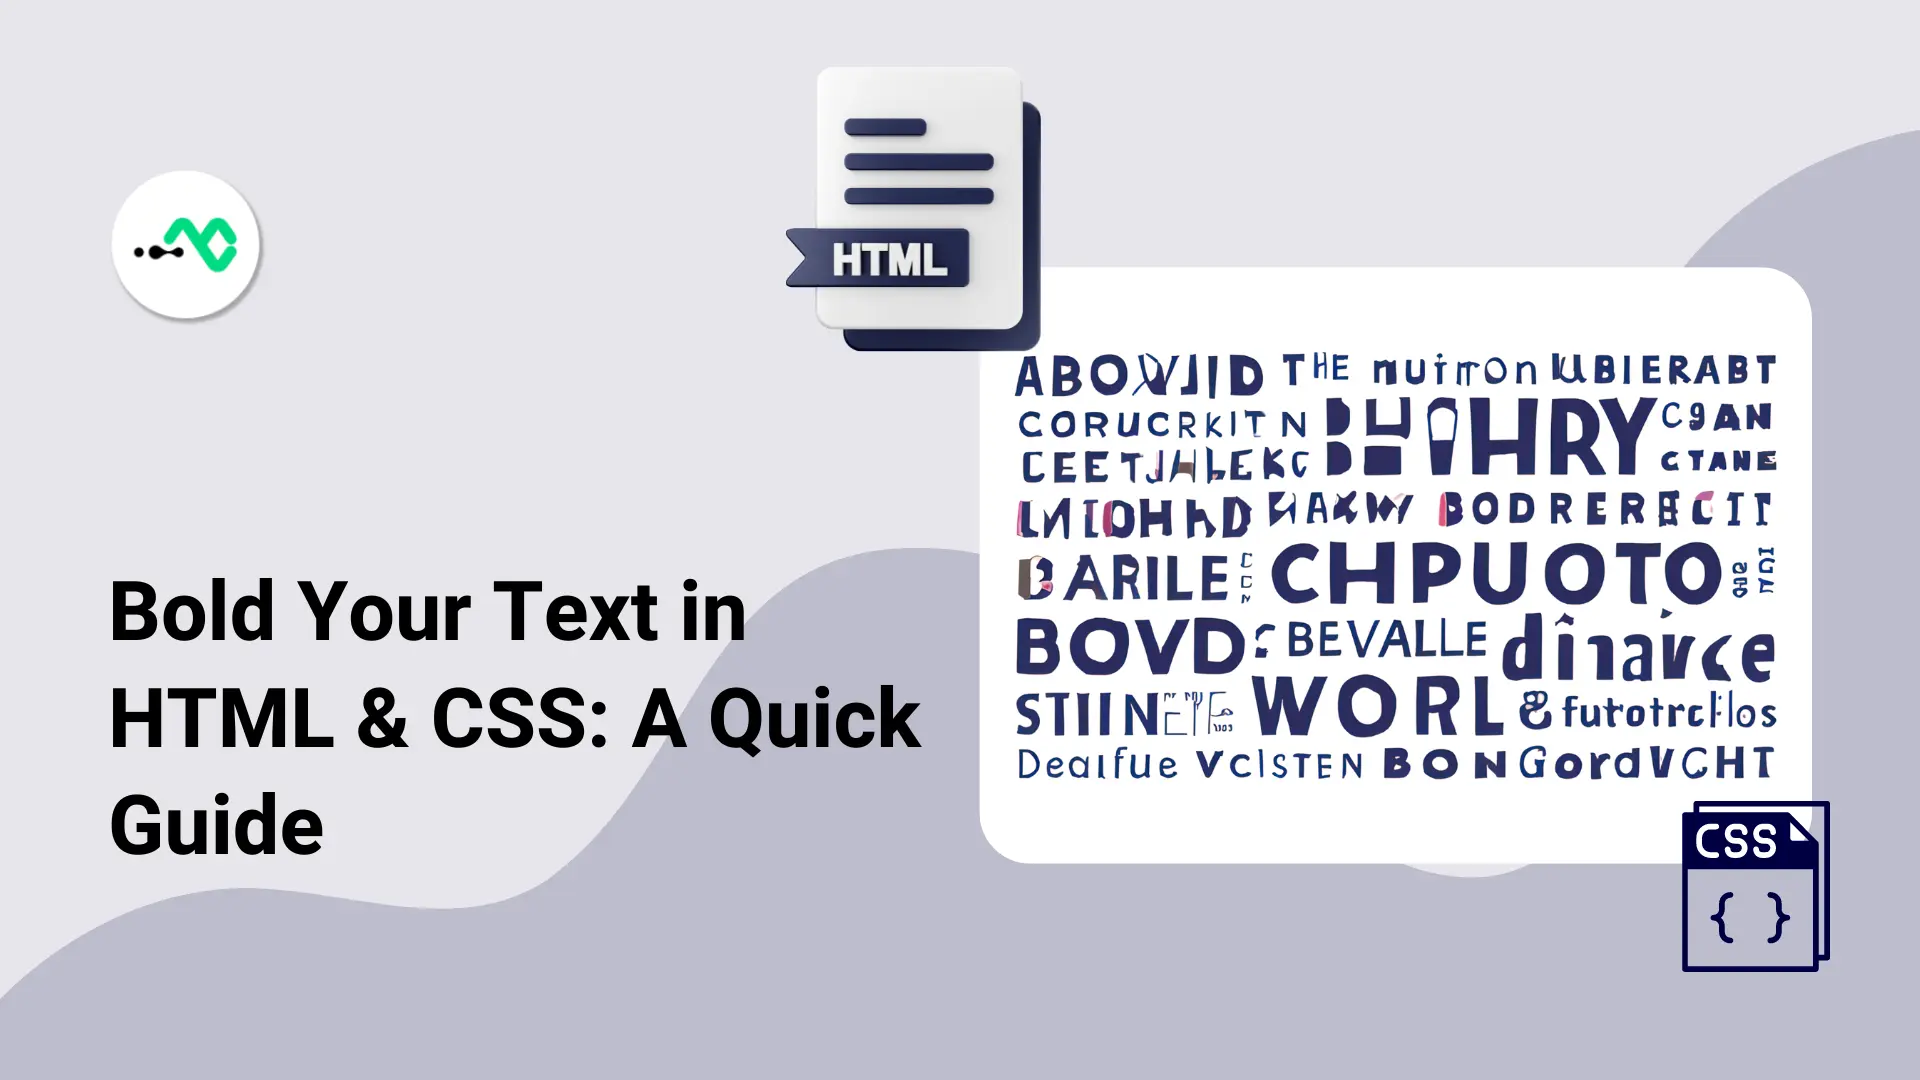 How to Style Text in HTML and CSS: Bold, Italics, and More